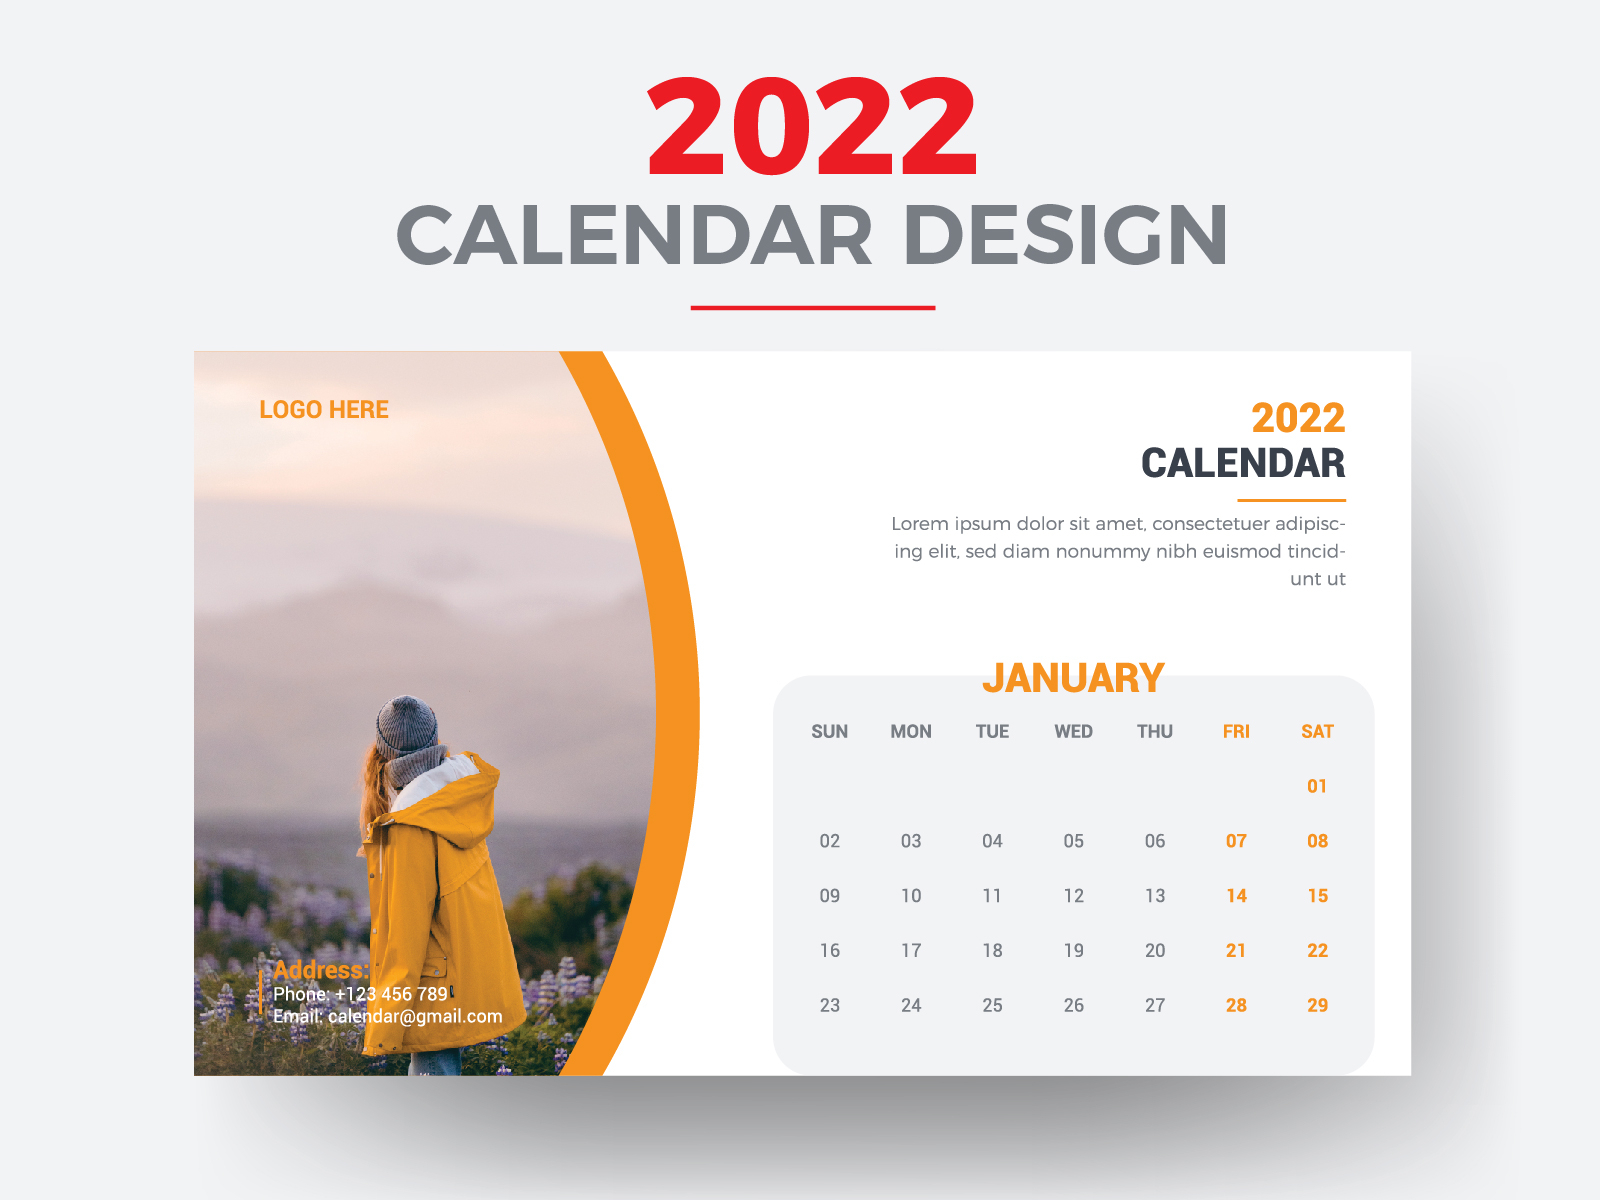 2022 Monthly Travel Desk Calendar Design Template by Graphic Panda on